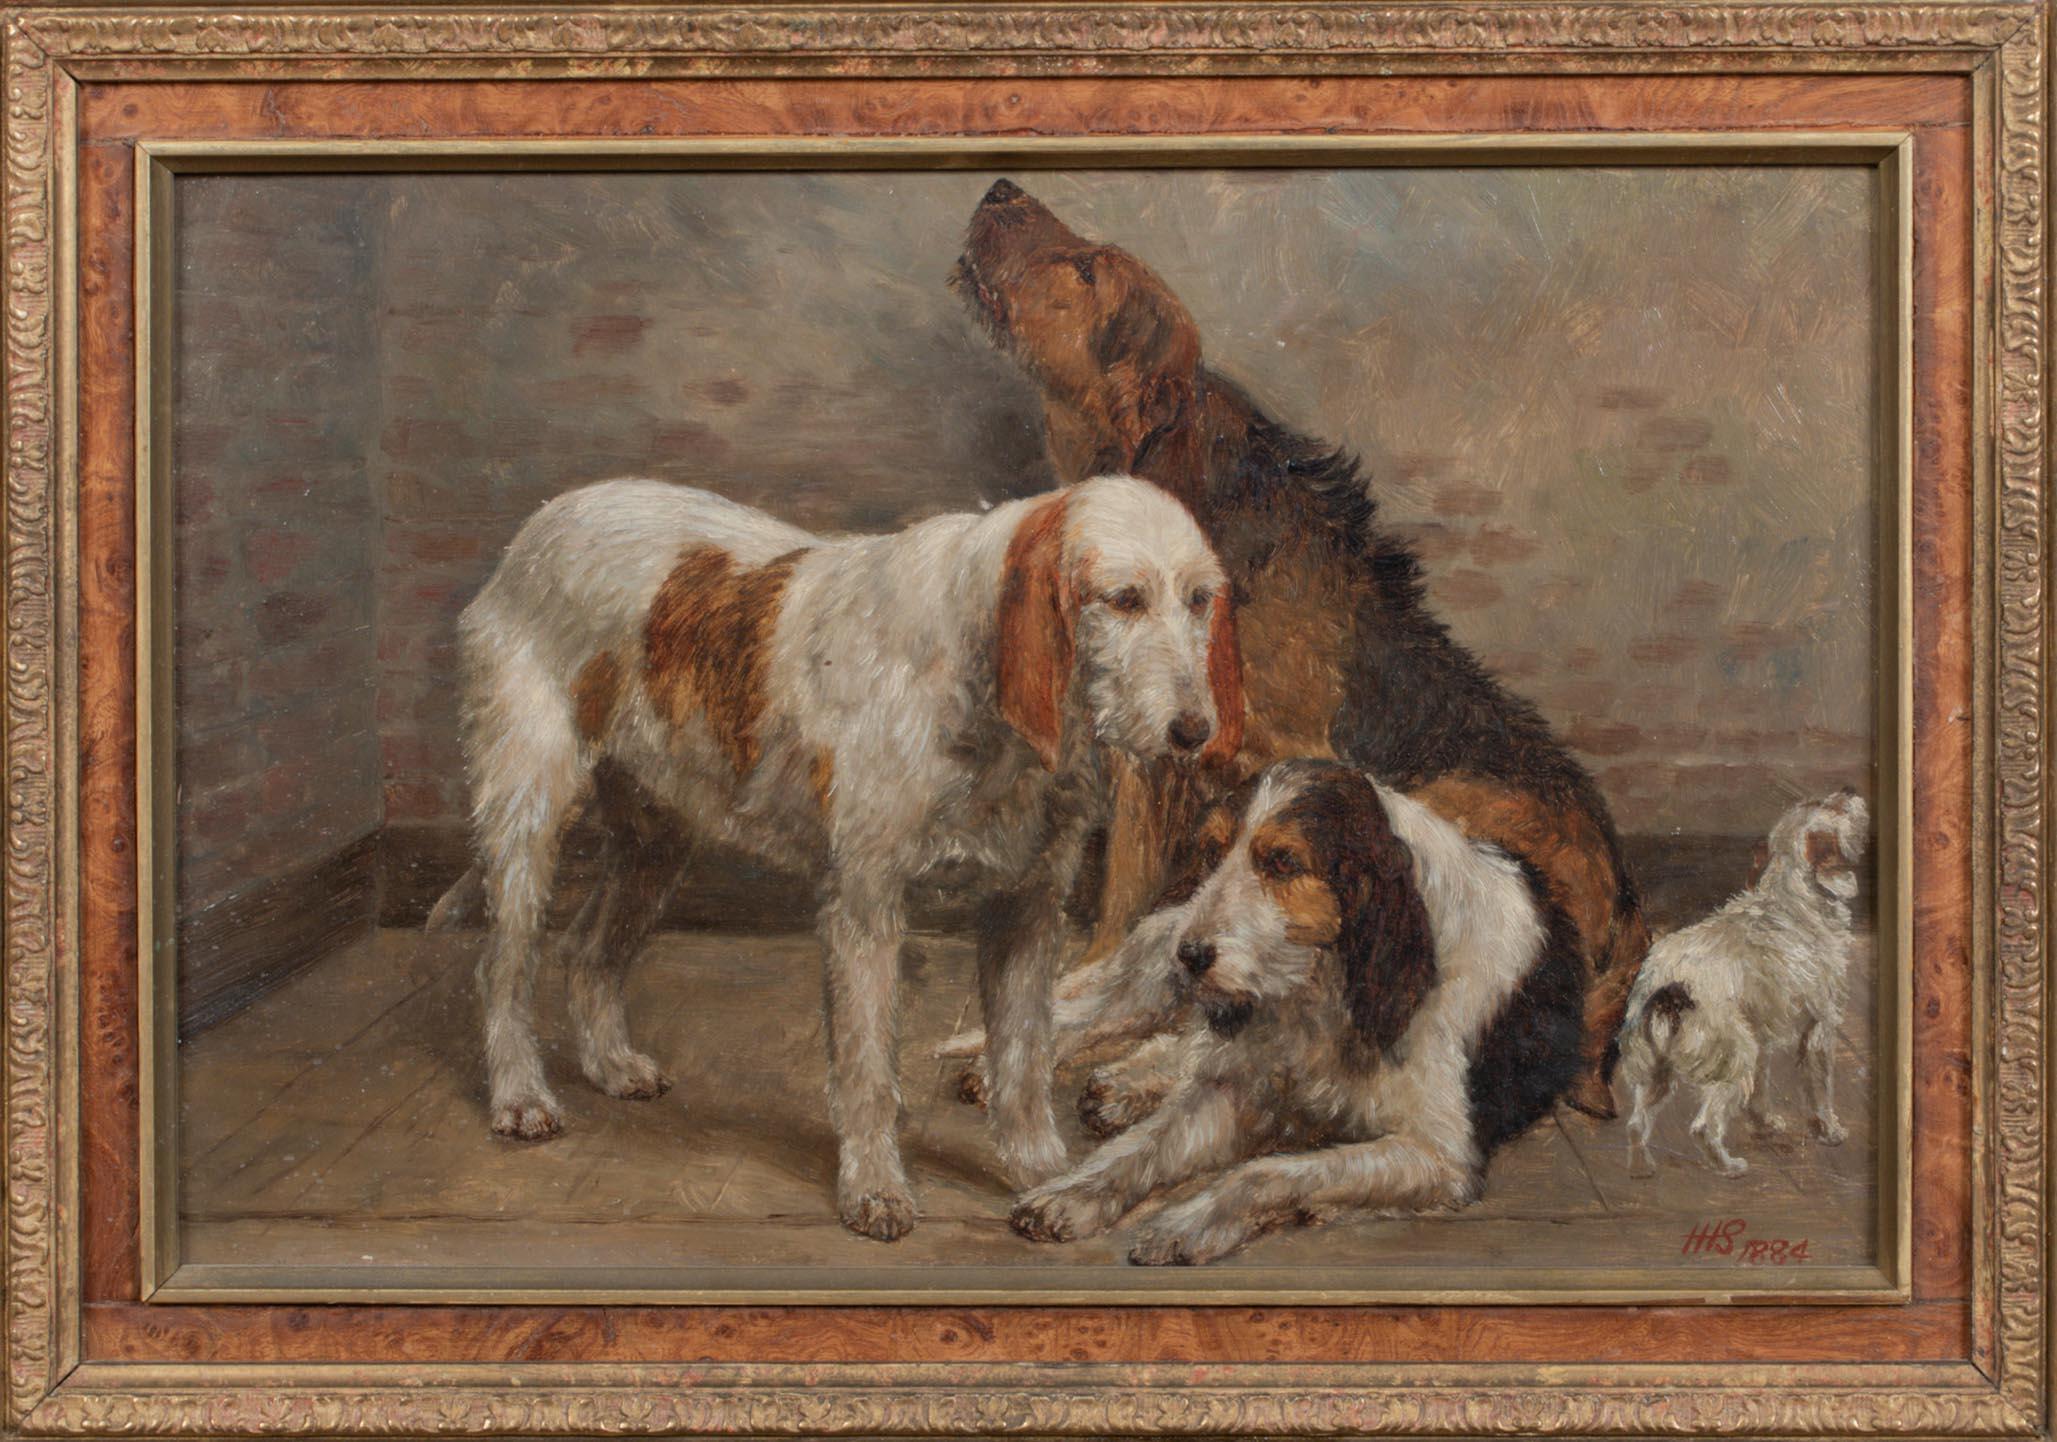 Waiting For Master, 19th Century

by  HENRY HARDY SIMPSON (1856-1920)


19th Century English interior scene of a pack of wire haired hounds awaiting their master, oil on panel by Henry Hardy Simpson. Good quality and condition study of the unusual